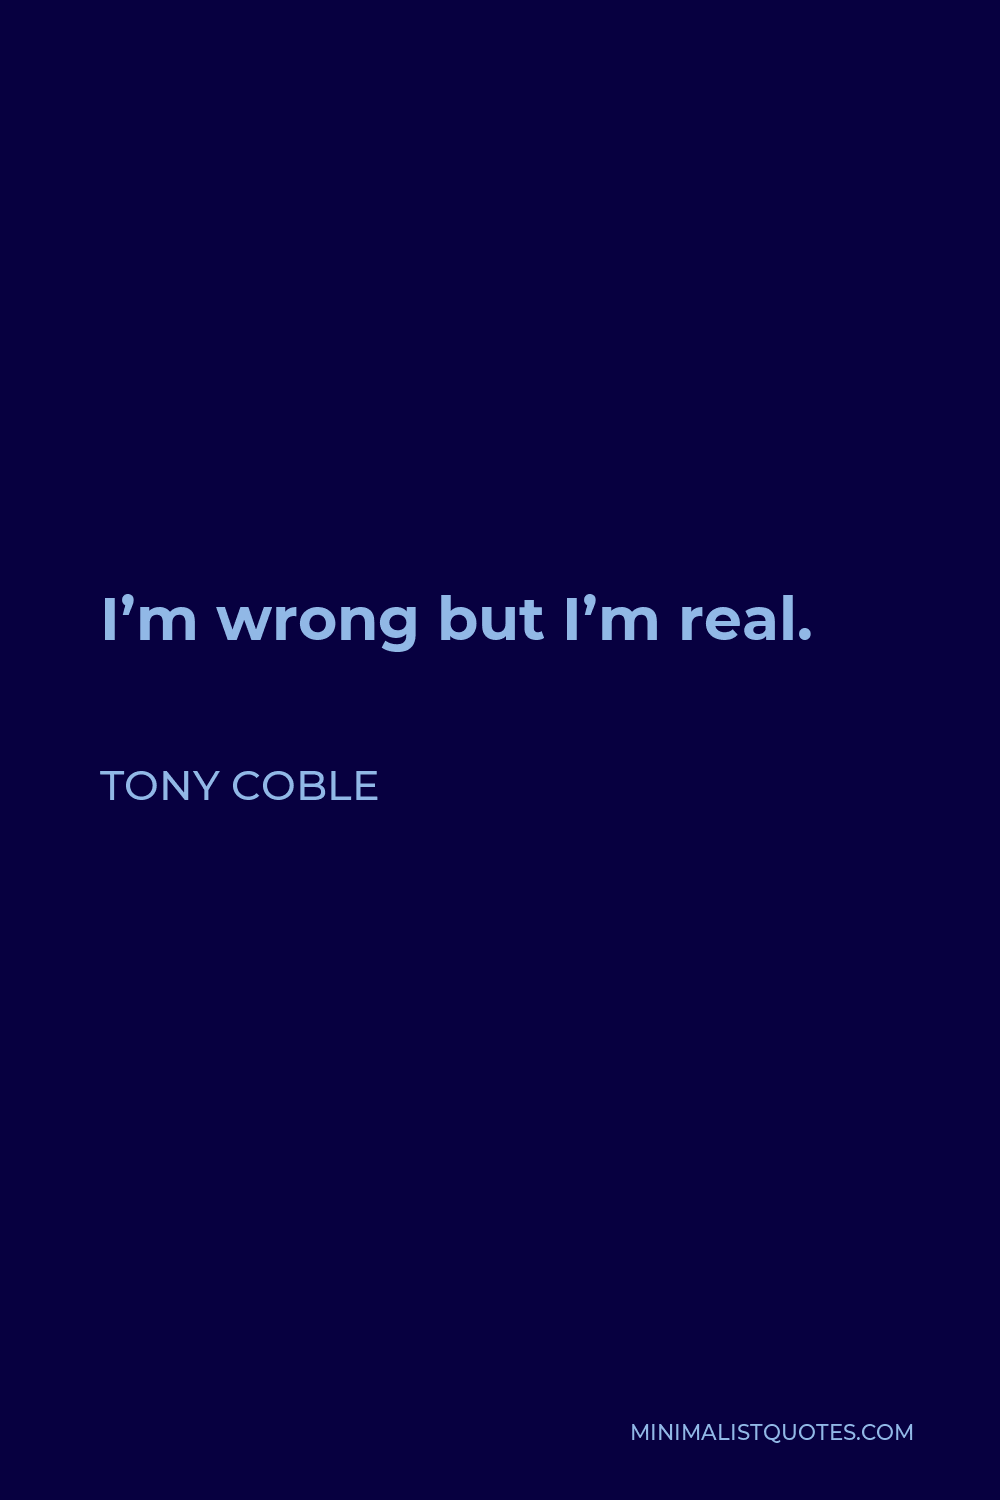 Tony Coble Quote - I’m wrong but I’m real.